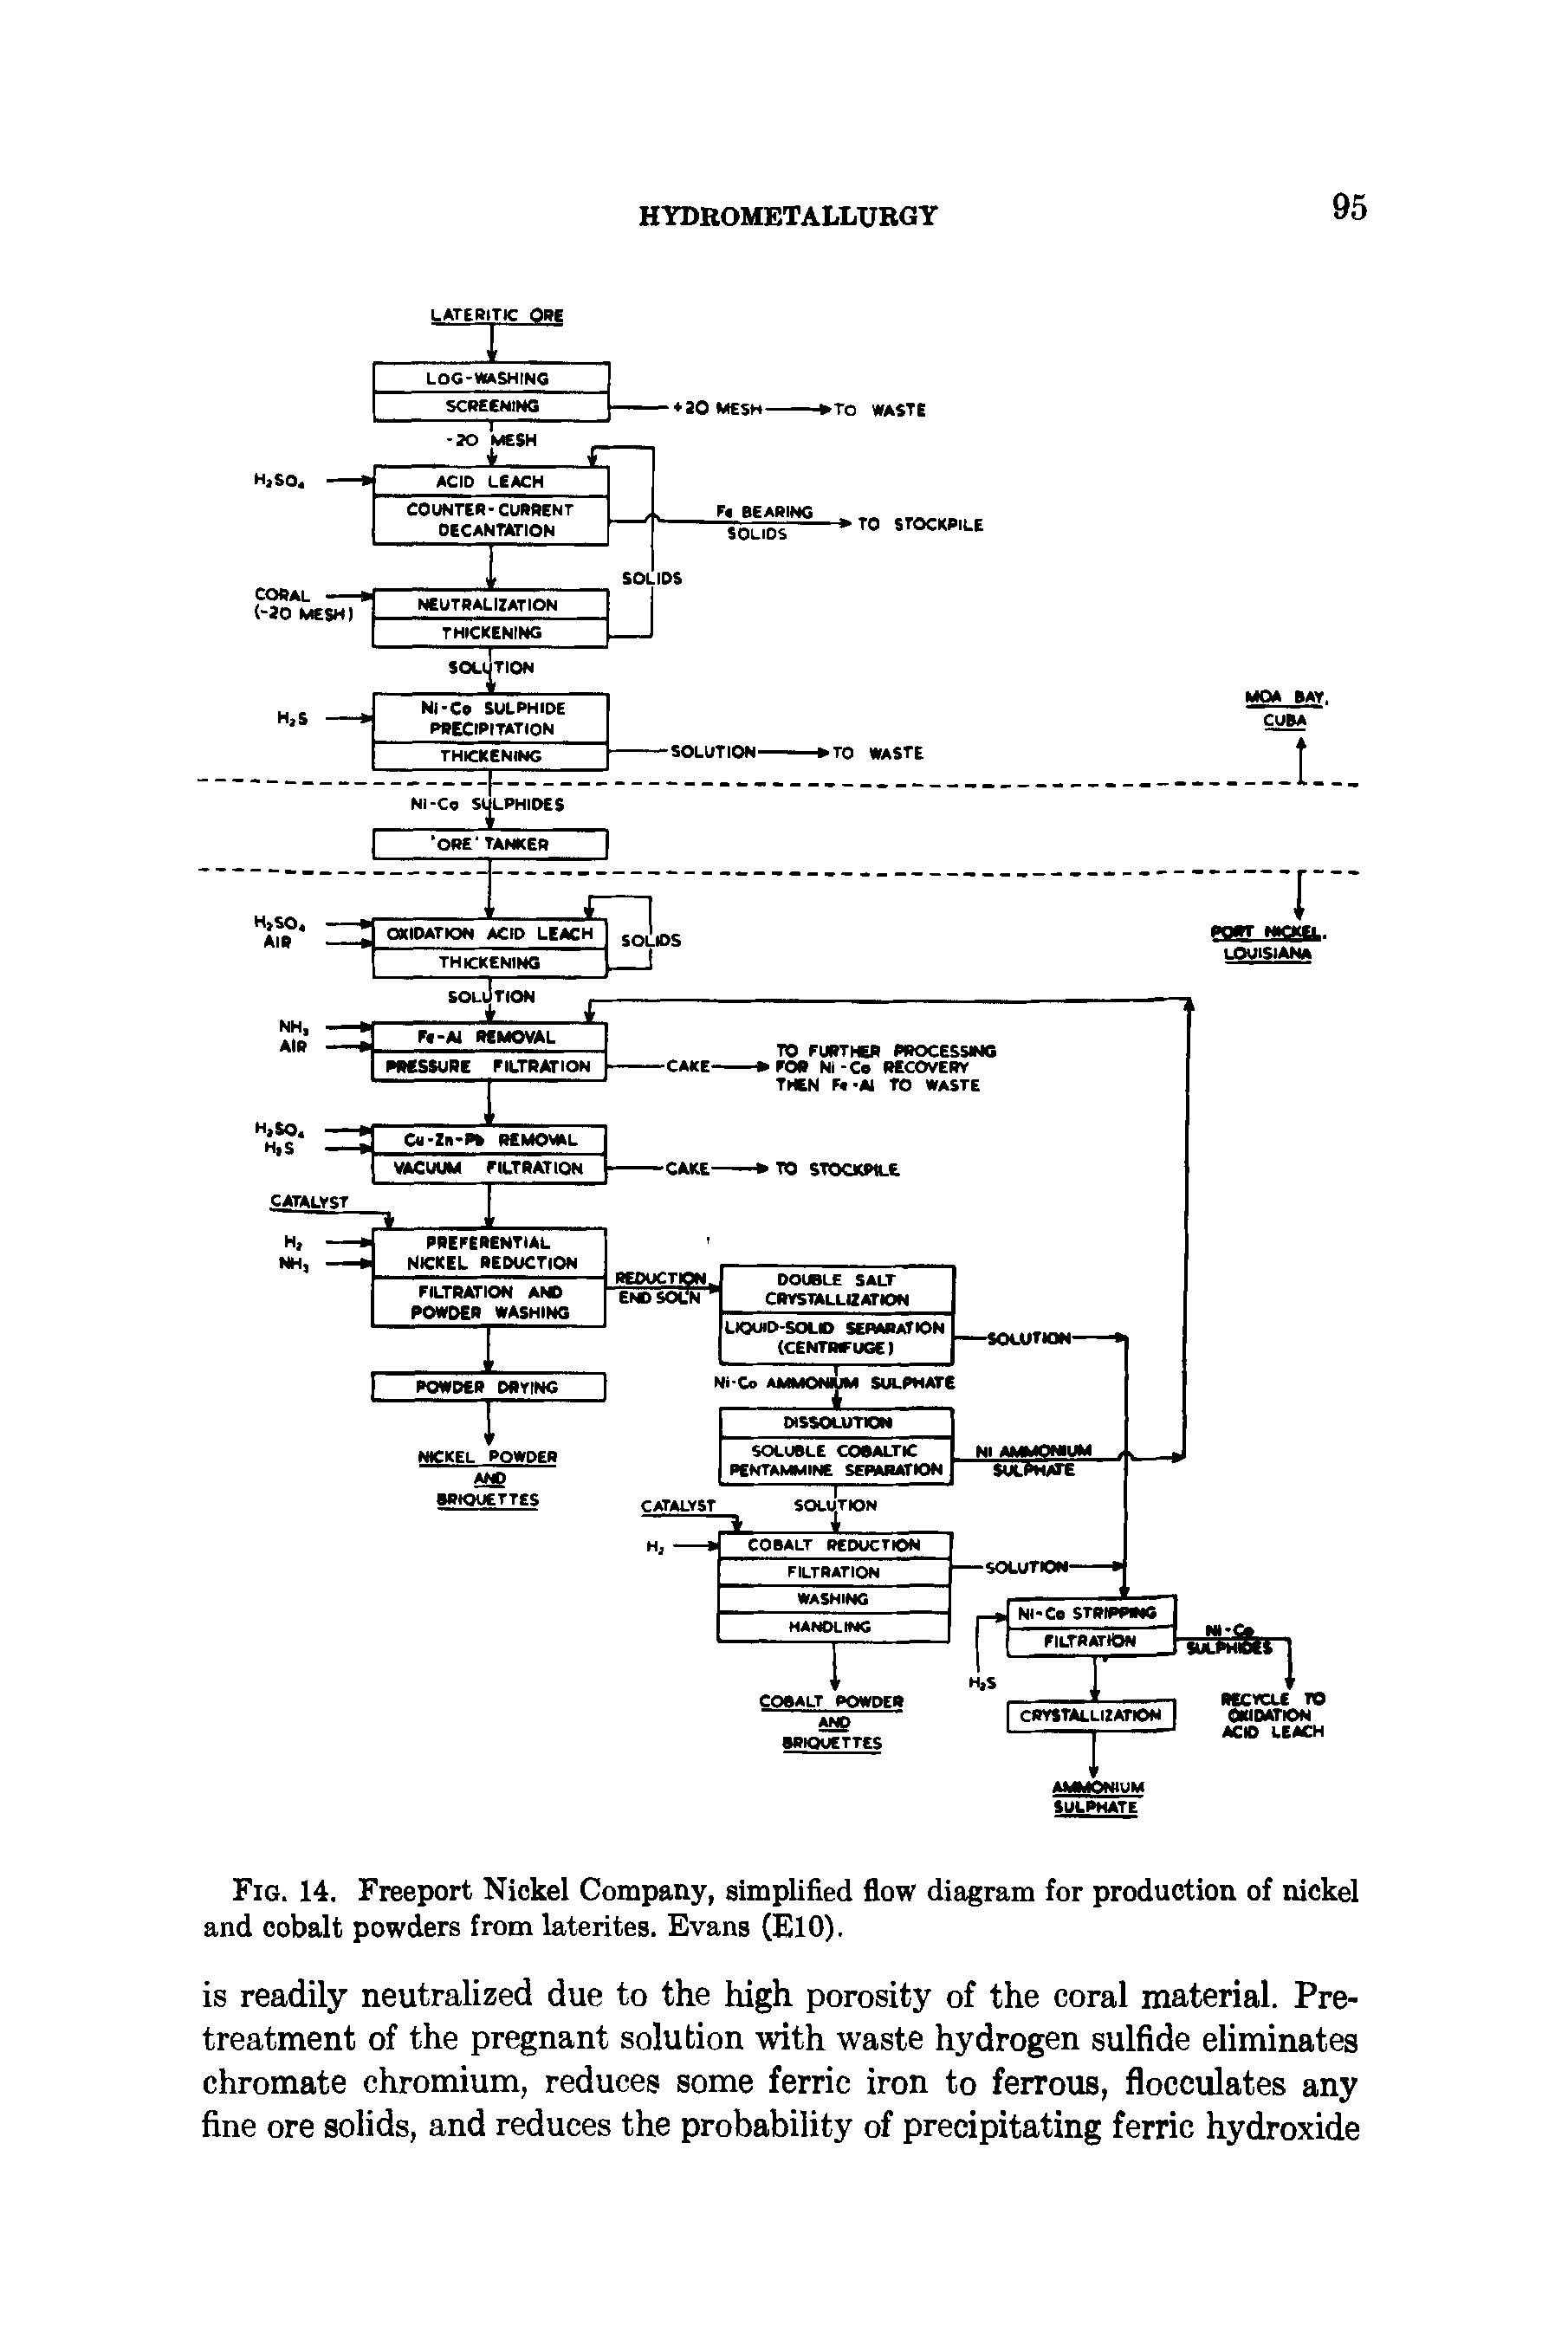 Fig. 14. Freeport Nickel Company, simplified flow diagram for production of nickel and cobalt powders from laterites. Evans (ElO).